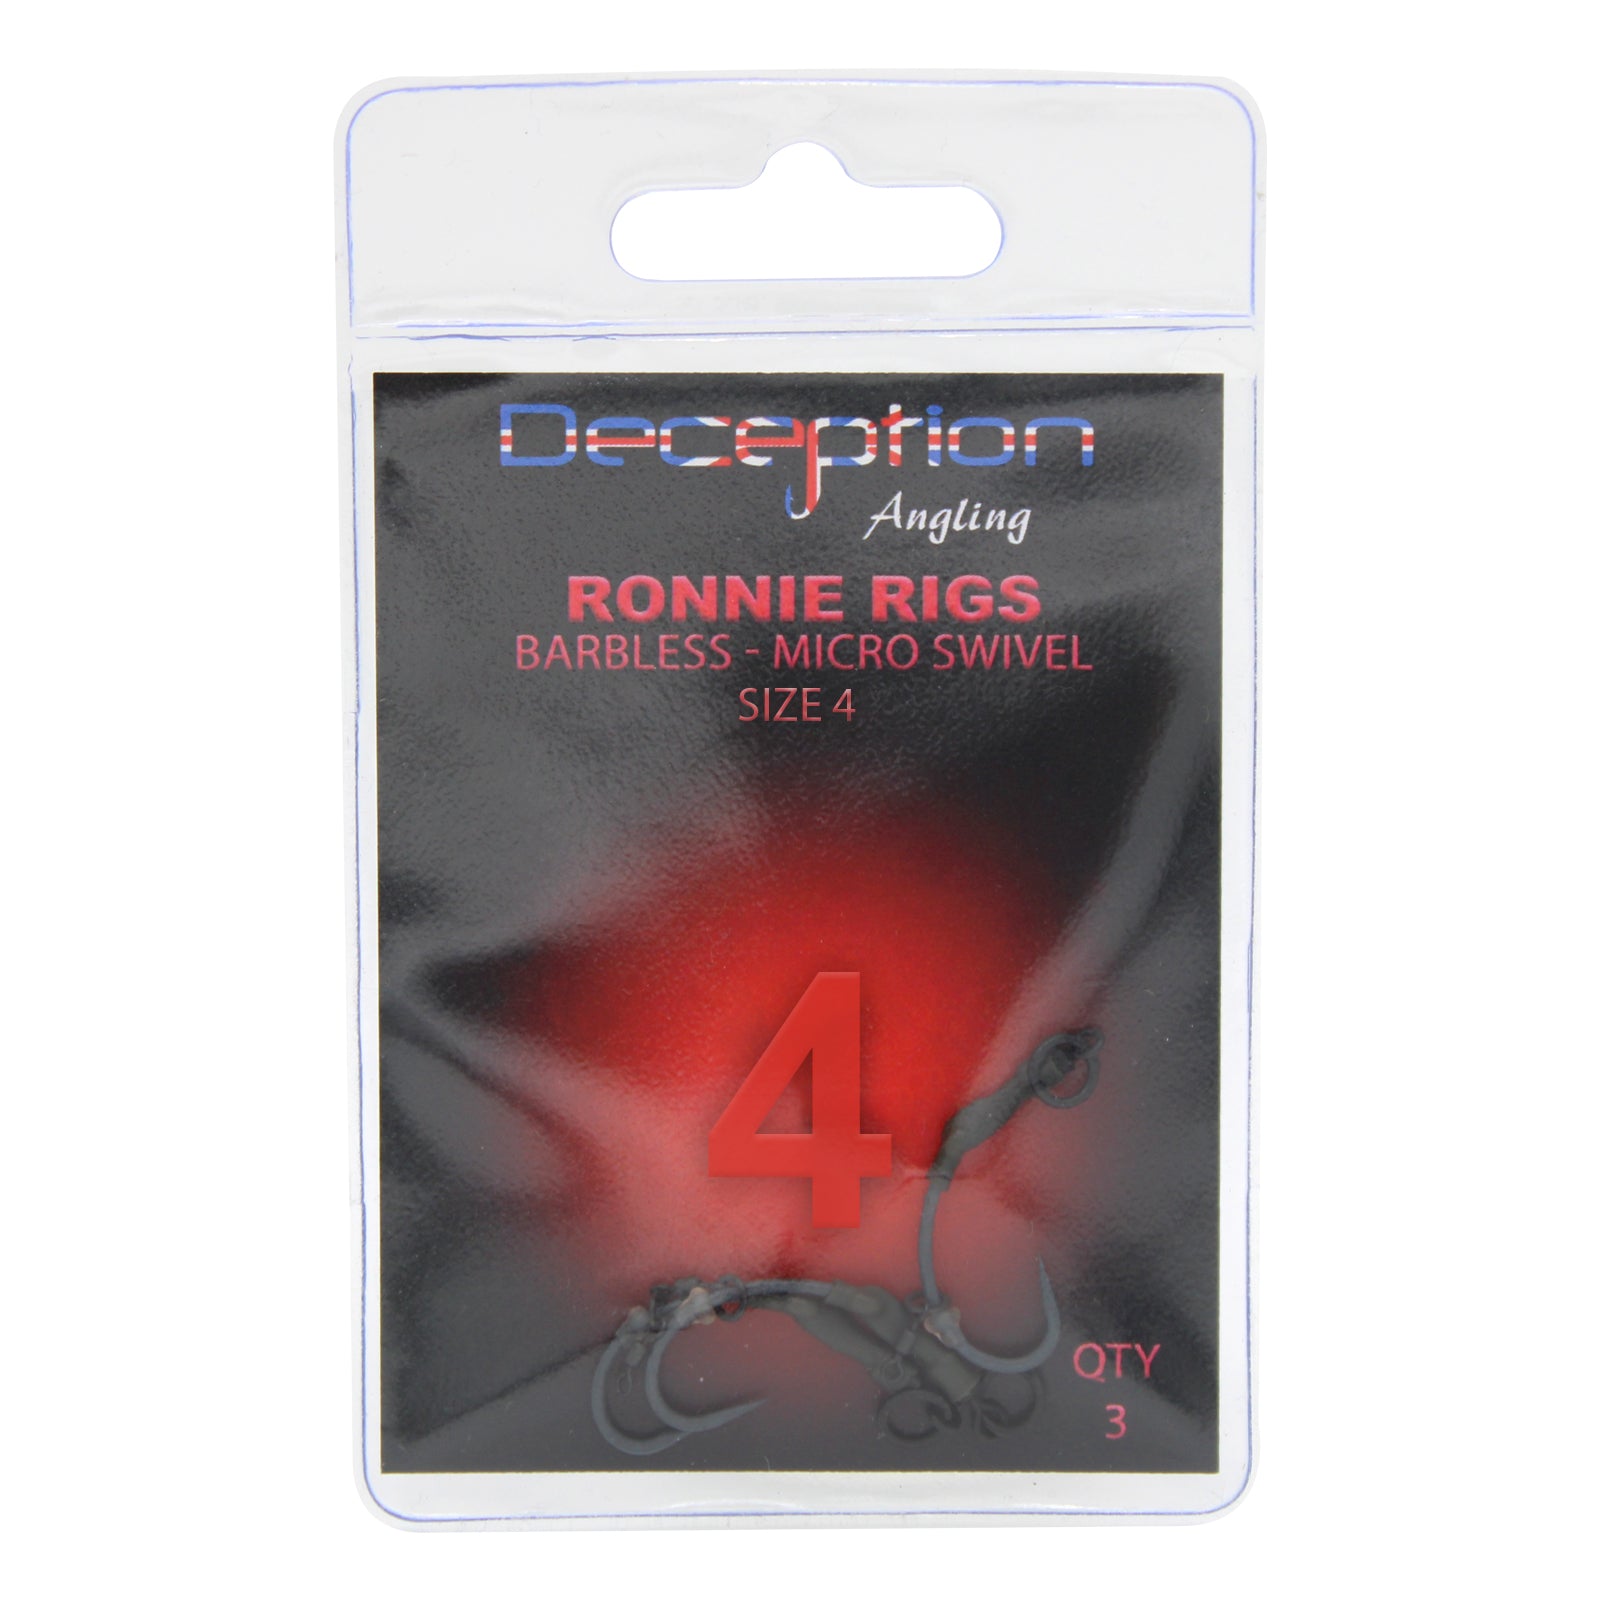 Ronnie Rigs Barbless Micro Swivel Fishing Hooks Size 4